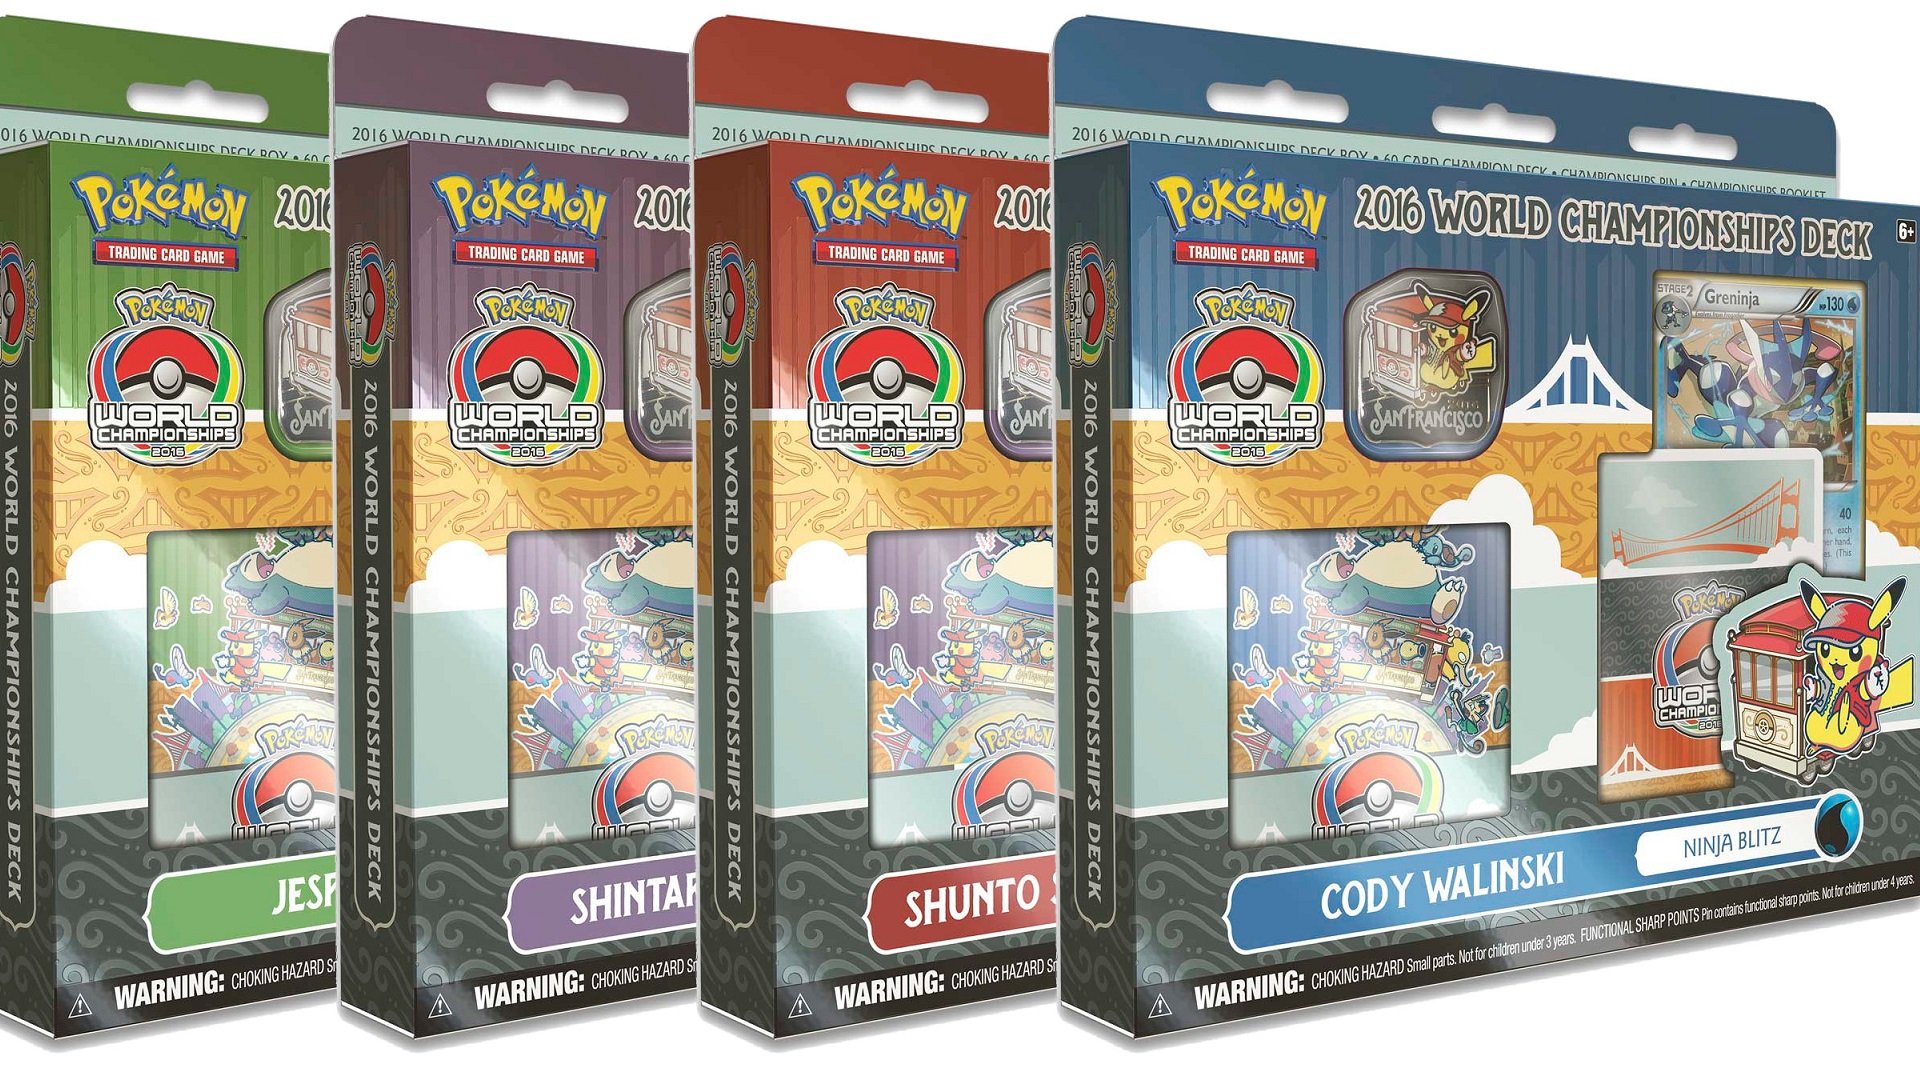 An image of four Pokemon Trading Card Game Decks From Pokemon Worlds 2016